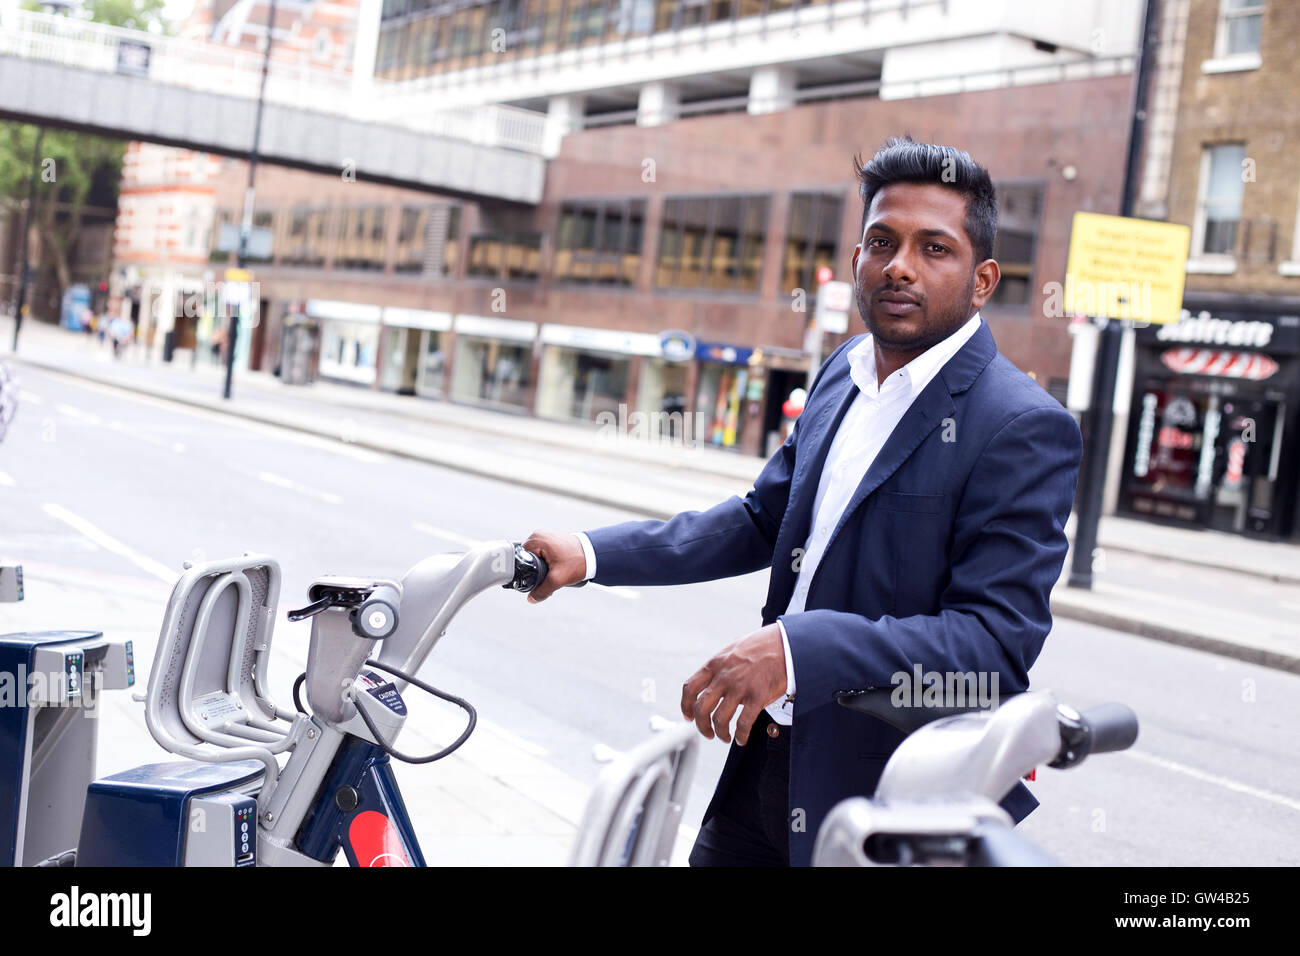 Indian business man taking out a hire bike in the city Stock Photo